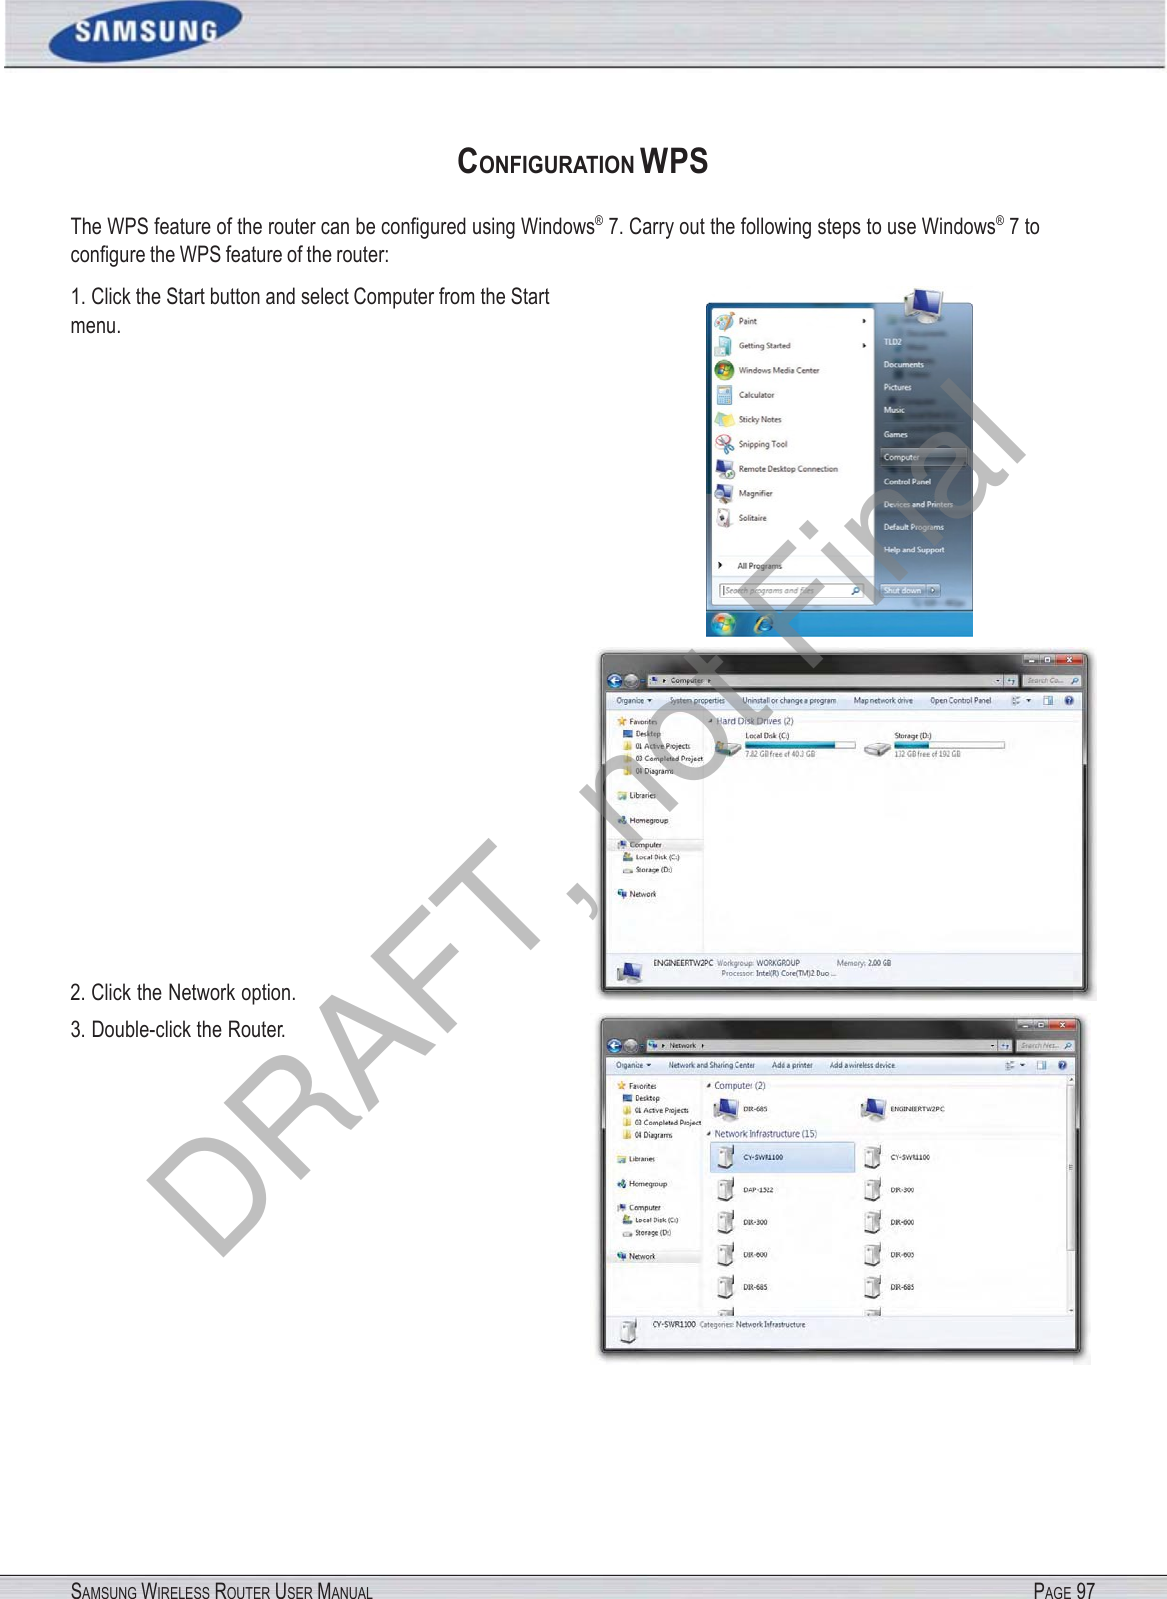 SAMSUNG WIRELESS ROUTER USER MANUAL PAGE 97CONFIGURATION WPS The WPS feature of the router can be conﬁgured using Windows® 7. Carry out the following steps to use Windows® 7 to conﬁgure the WPS feature of the router: 1. Click the Start button and select Computer from the Start menu. 2. Click the Network option.  3. Double-click the Router. DRAFT, not Final